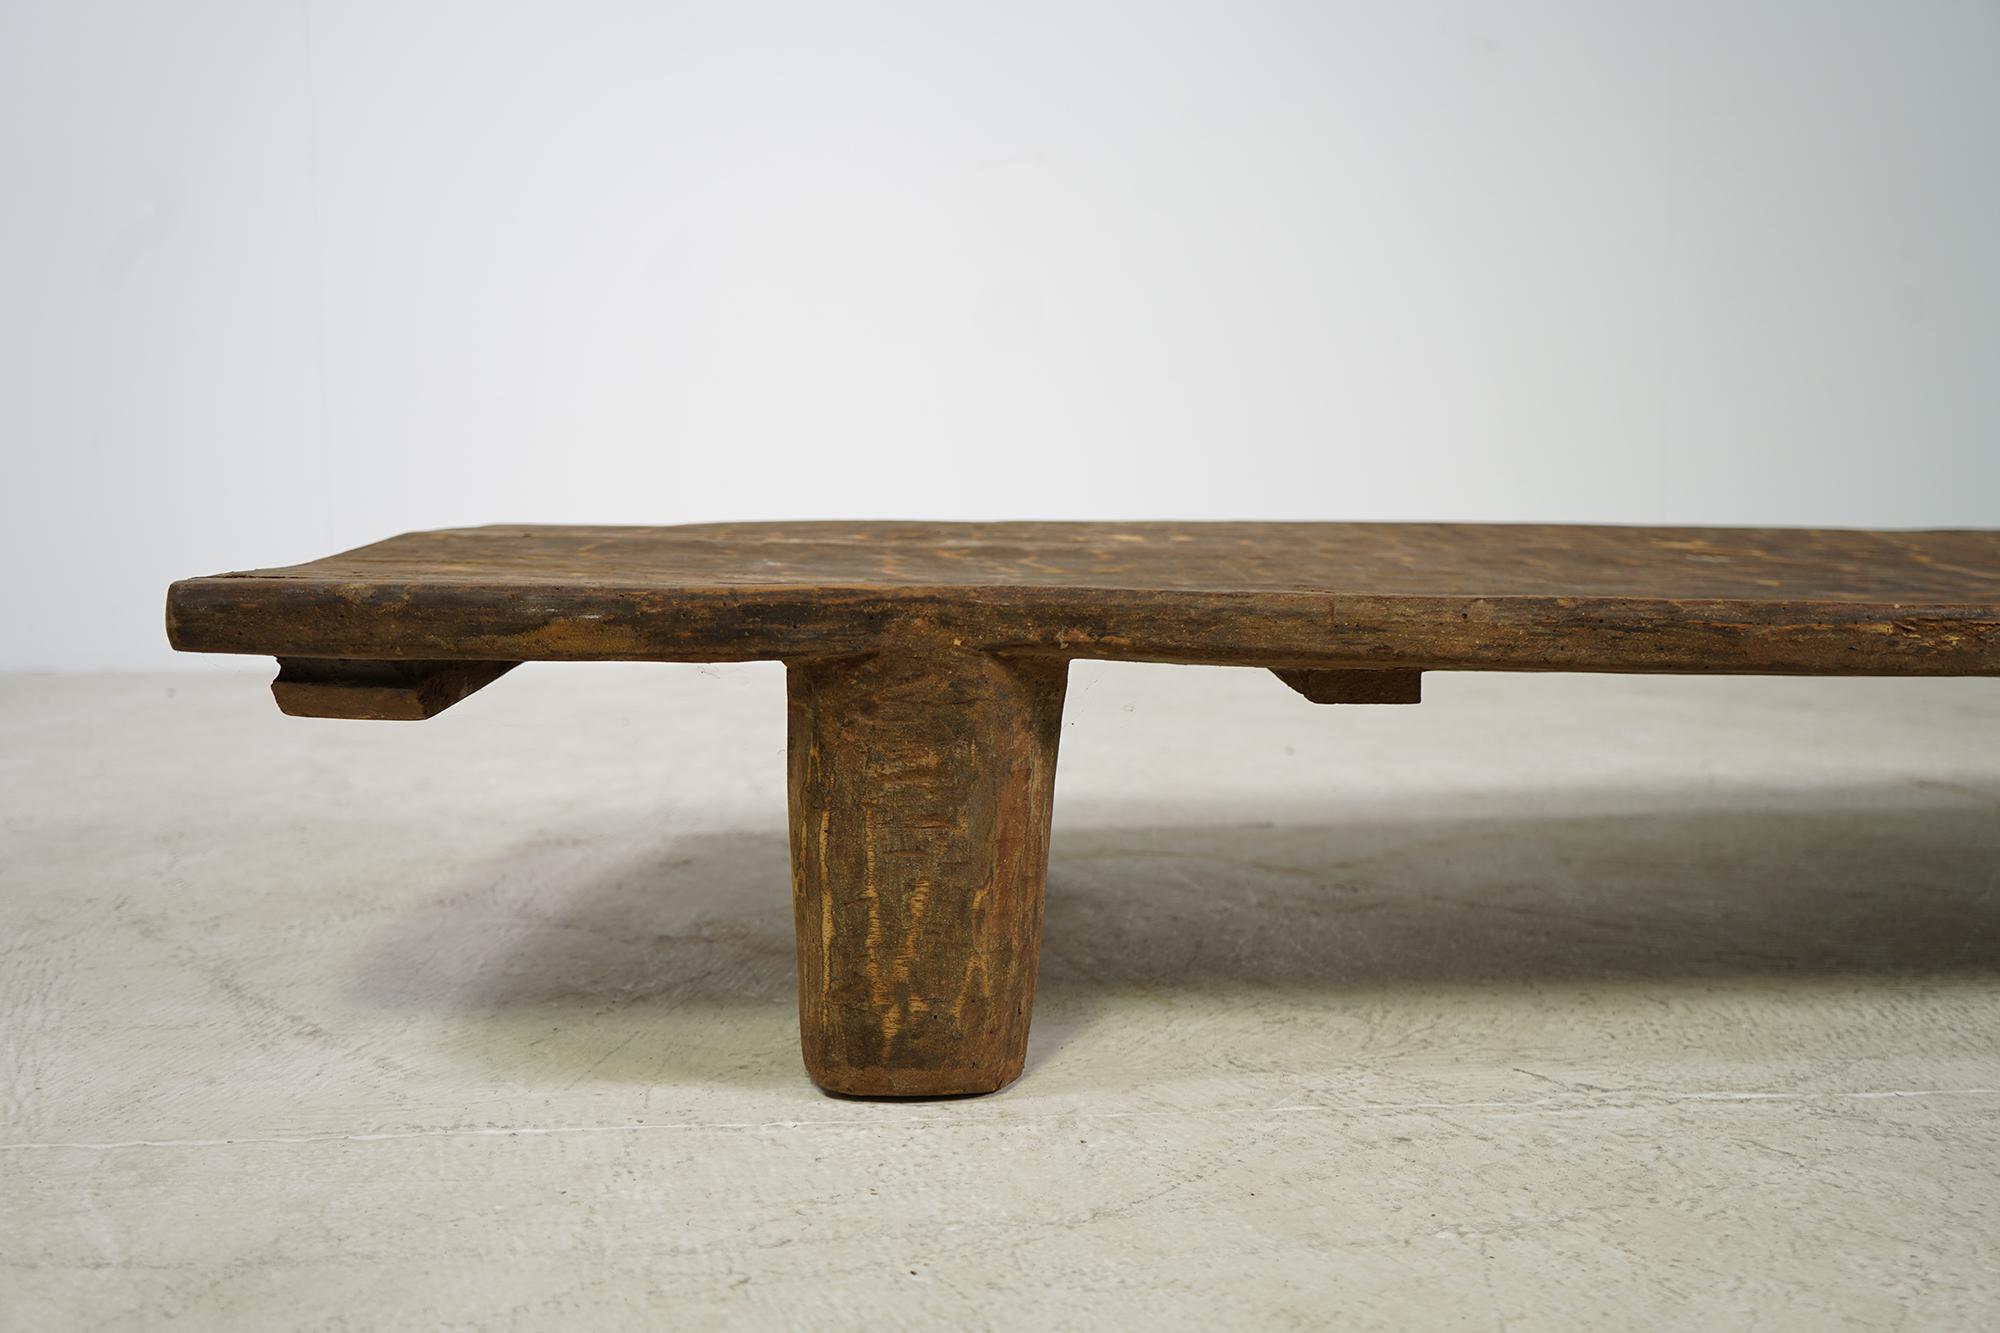 Rustic Naga Table or Bench, Hand Carved Wabi Sabi Style, Ancient Wood 'A' For Sale 2